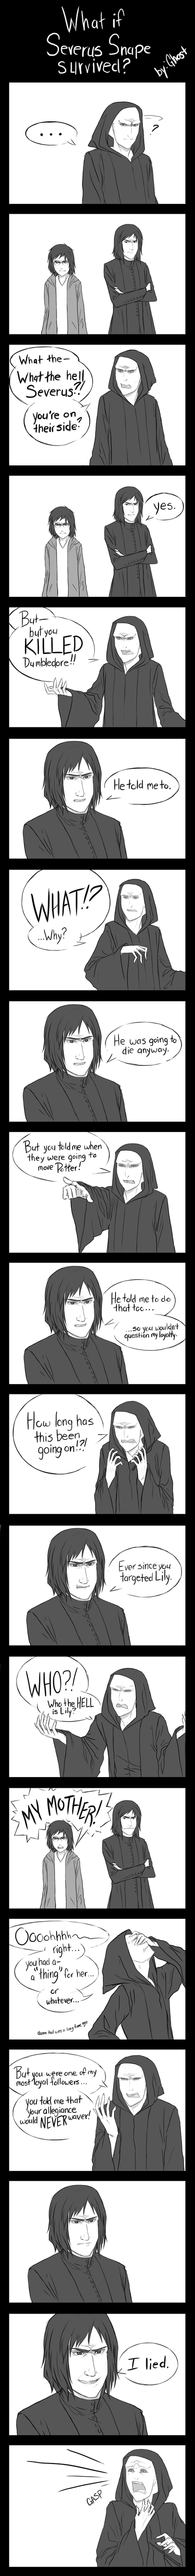 Snape had a "thing" for her